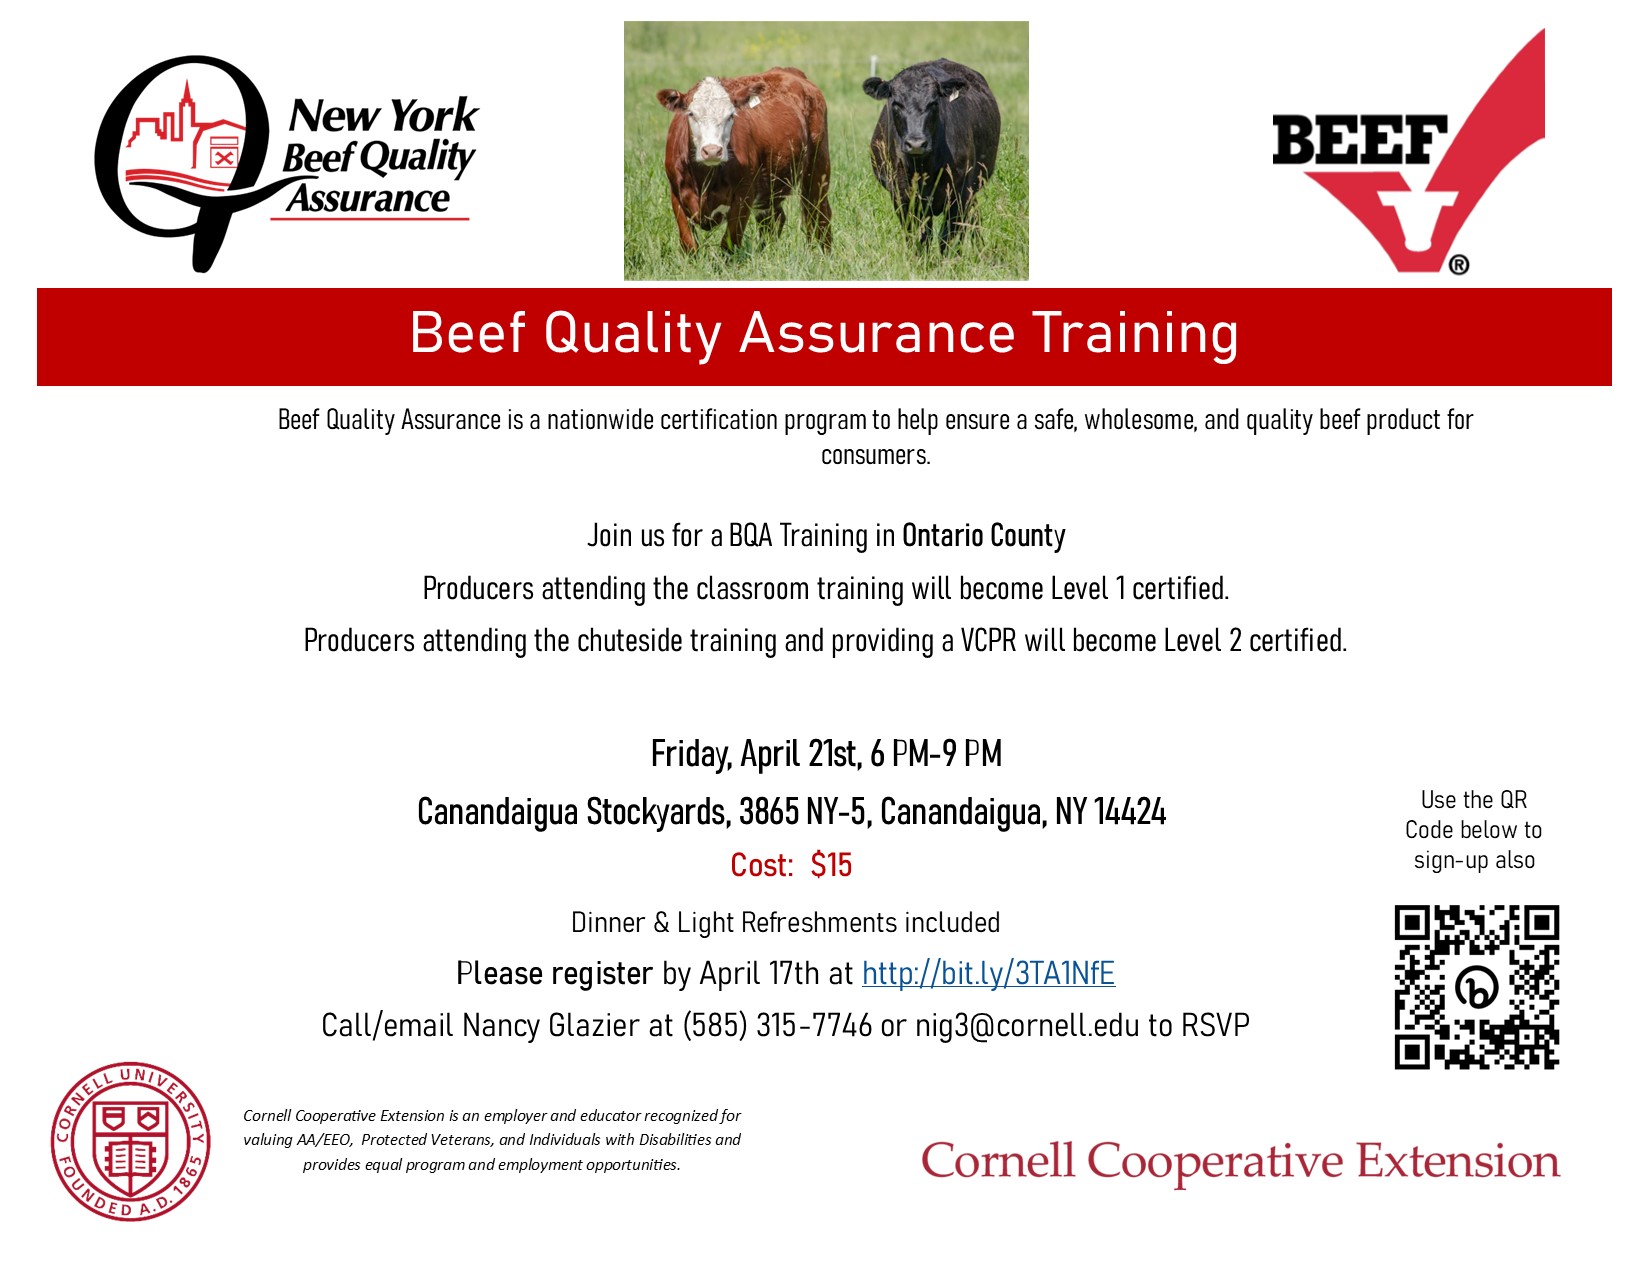 Beef Quality Assurance Opportunity in Ontario County